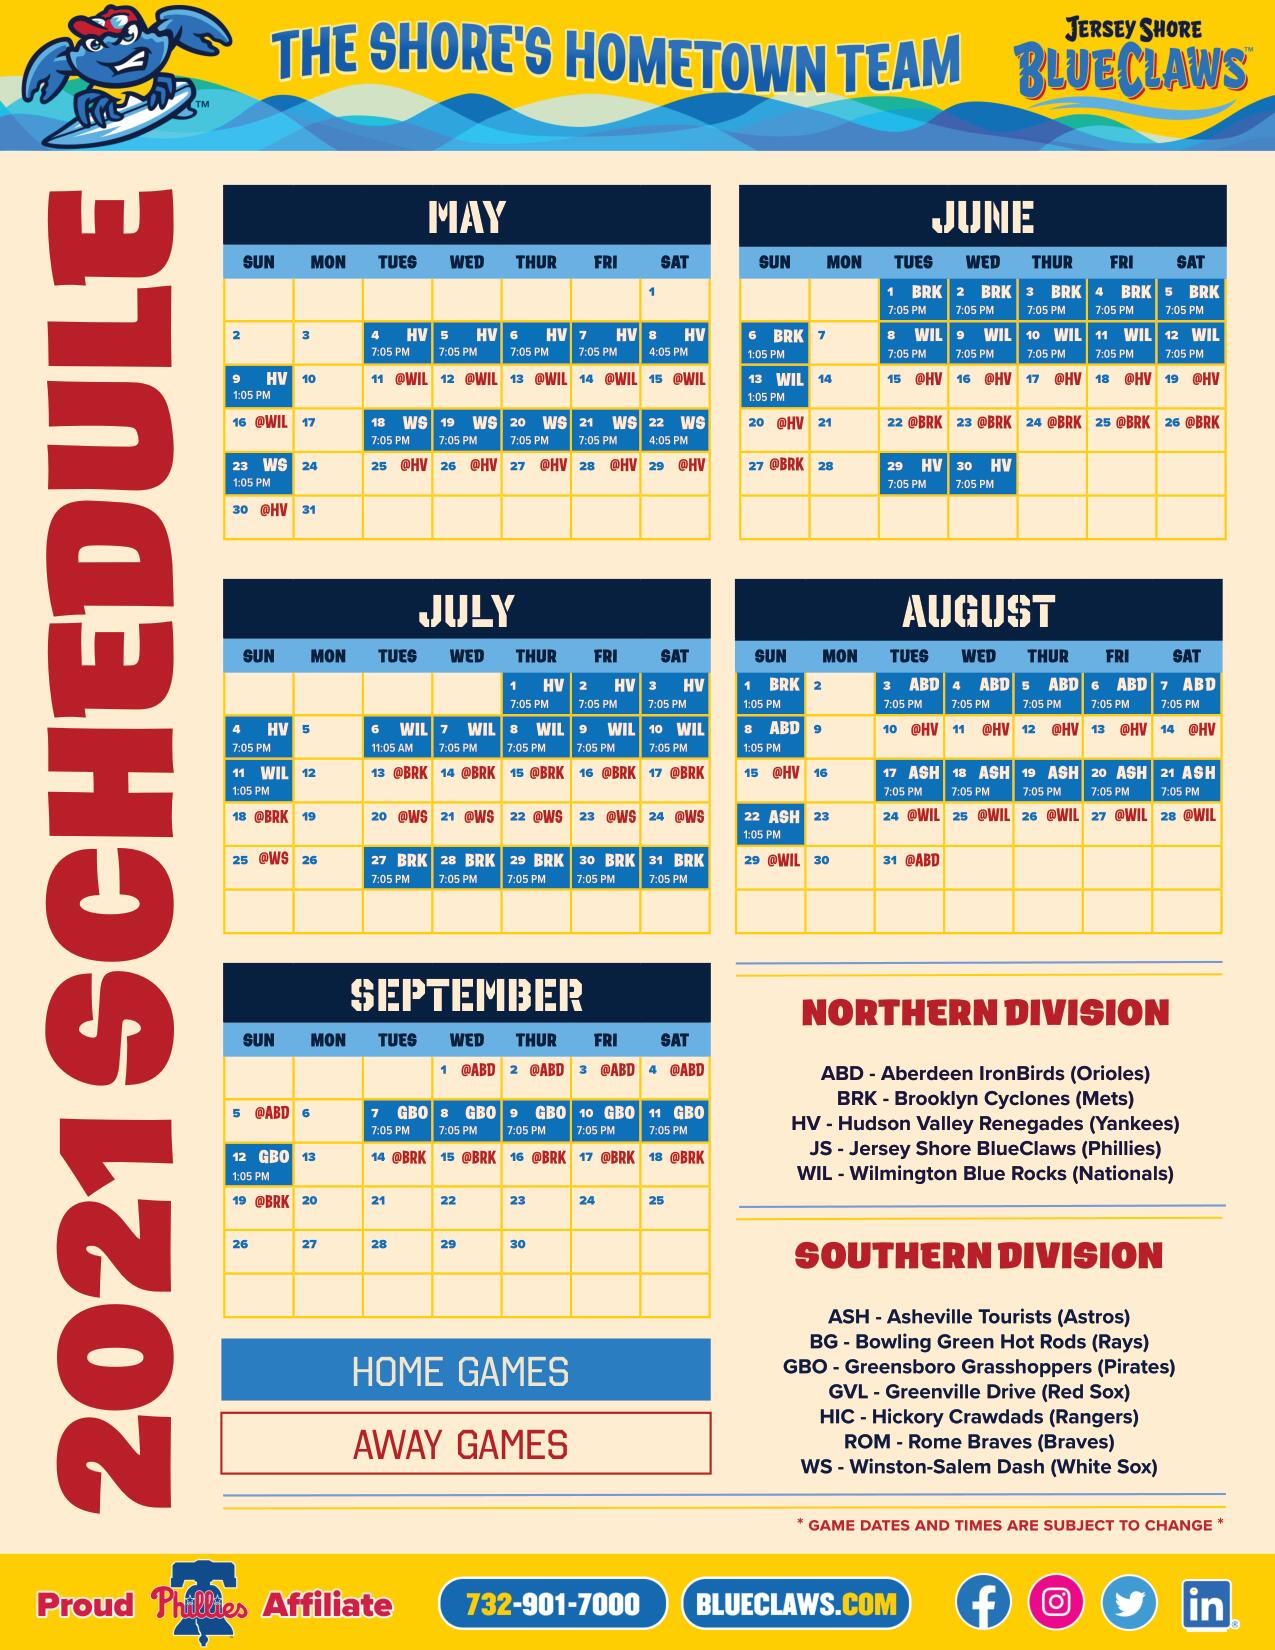 Jersey Shore BlueClaws Schedule